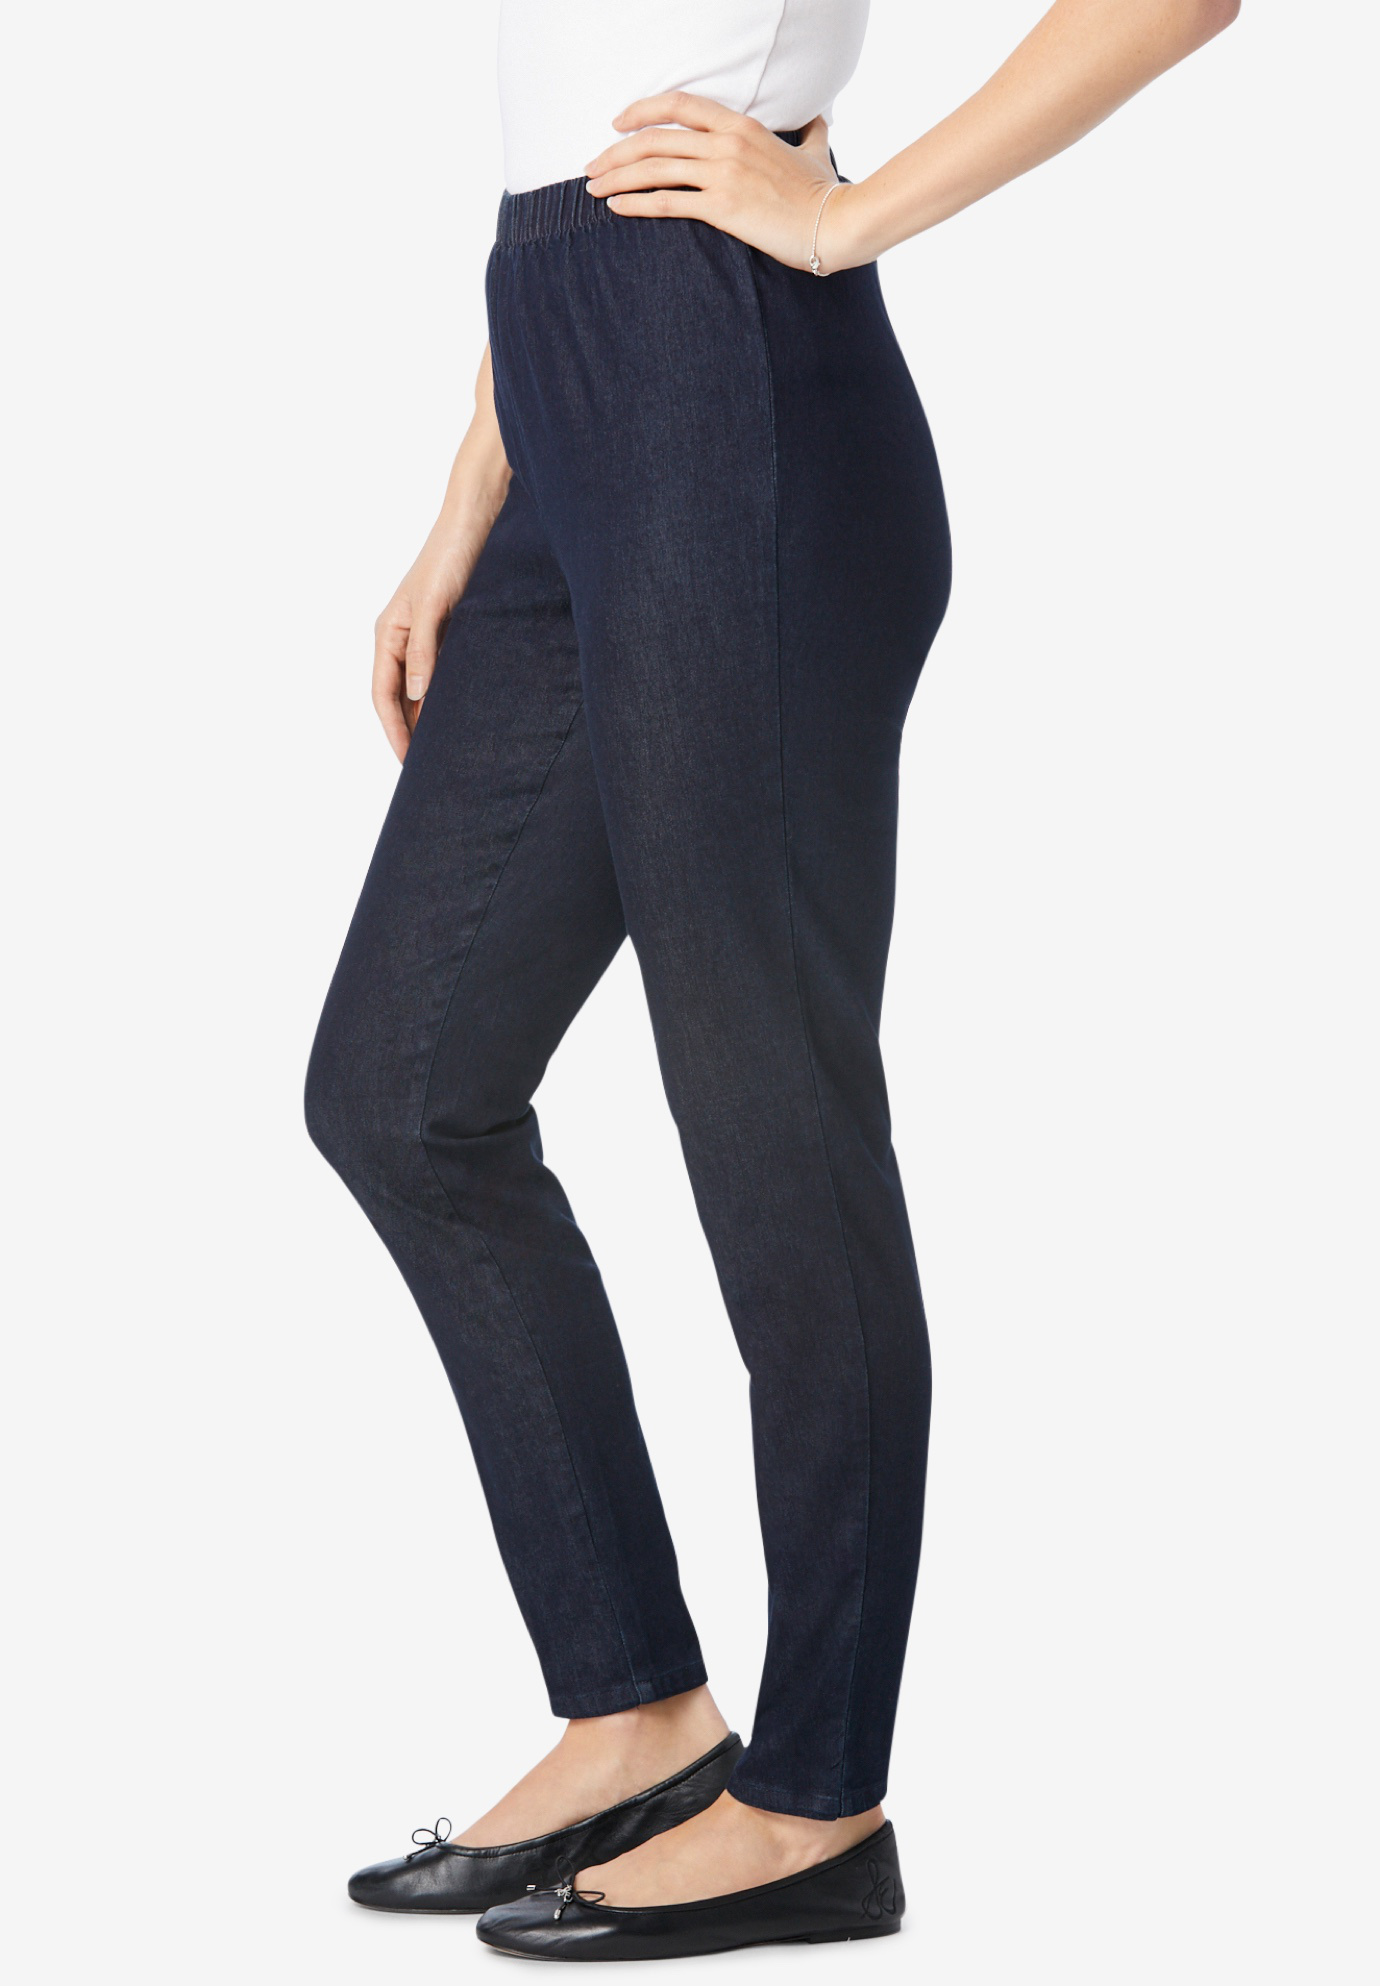 Woman Within Women's Plus Size Tall Fineline Denim Jegging Jegging - image 4 of 5